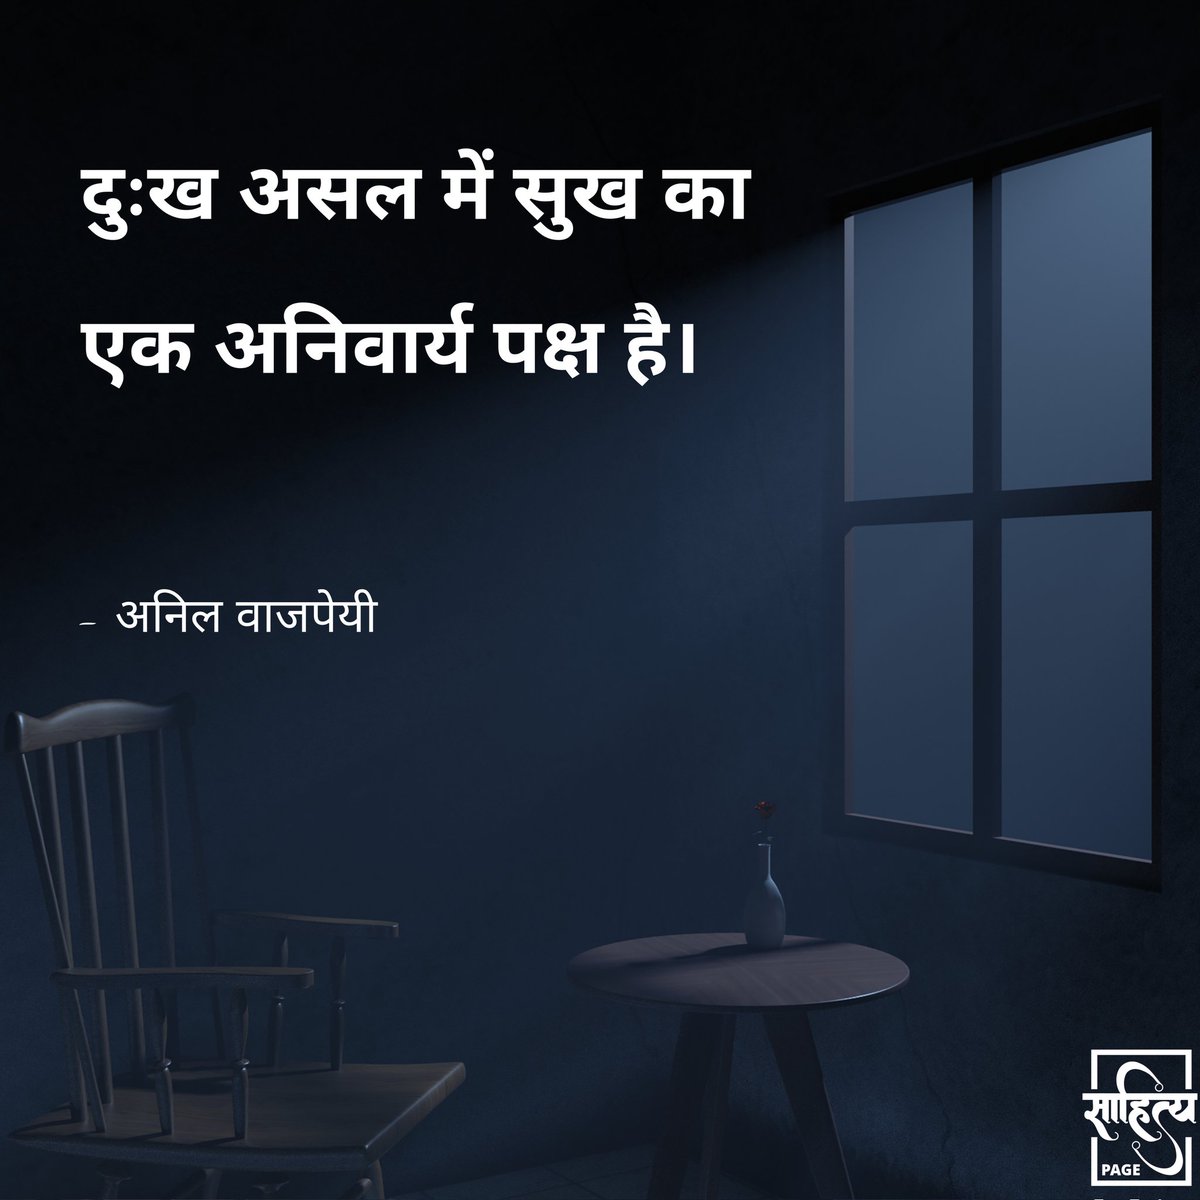 दुःख असल में सुख का एक अनिवार्य पक्ष है। 
– अनिल वाजपेयी 
. 
#hindiquotes #hindi #hindipoetry #poetry #quotes #inspiration #lifequote #hindiwriting #hindipoem #hindilines #hindipoems #writer